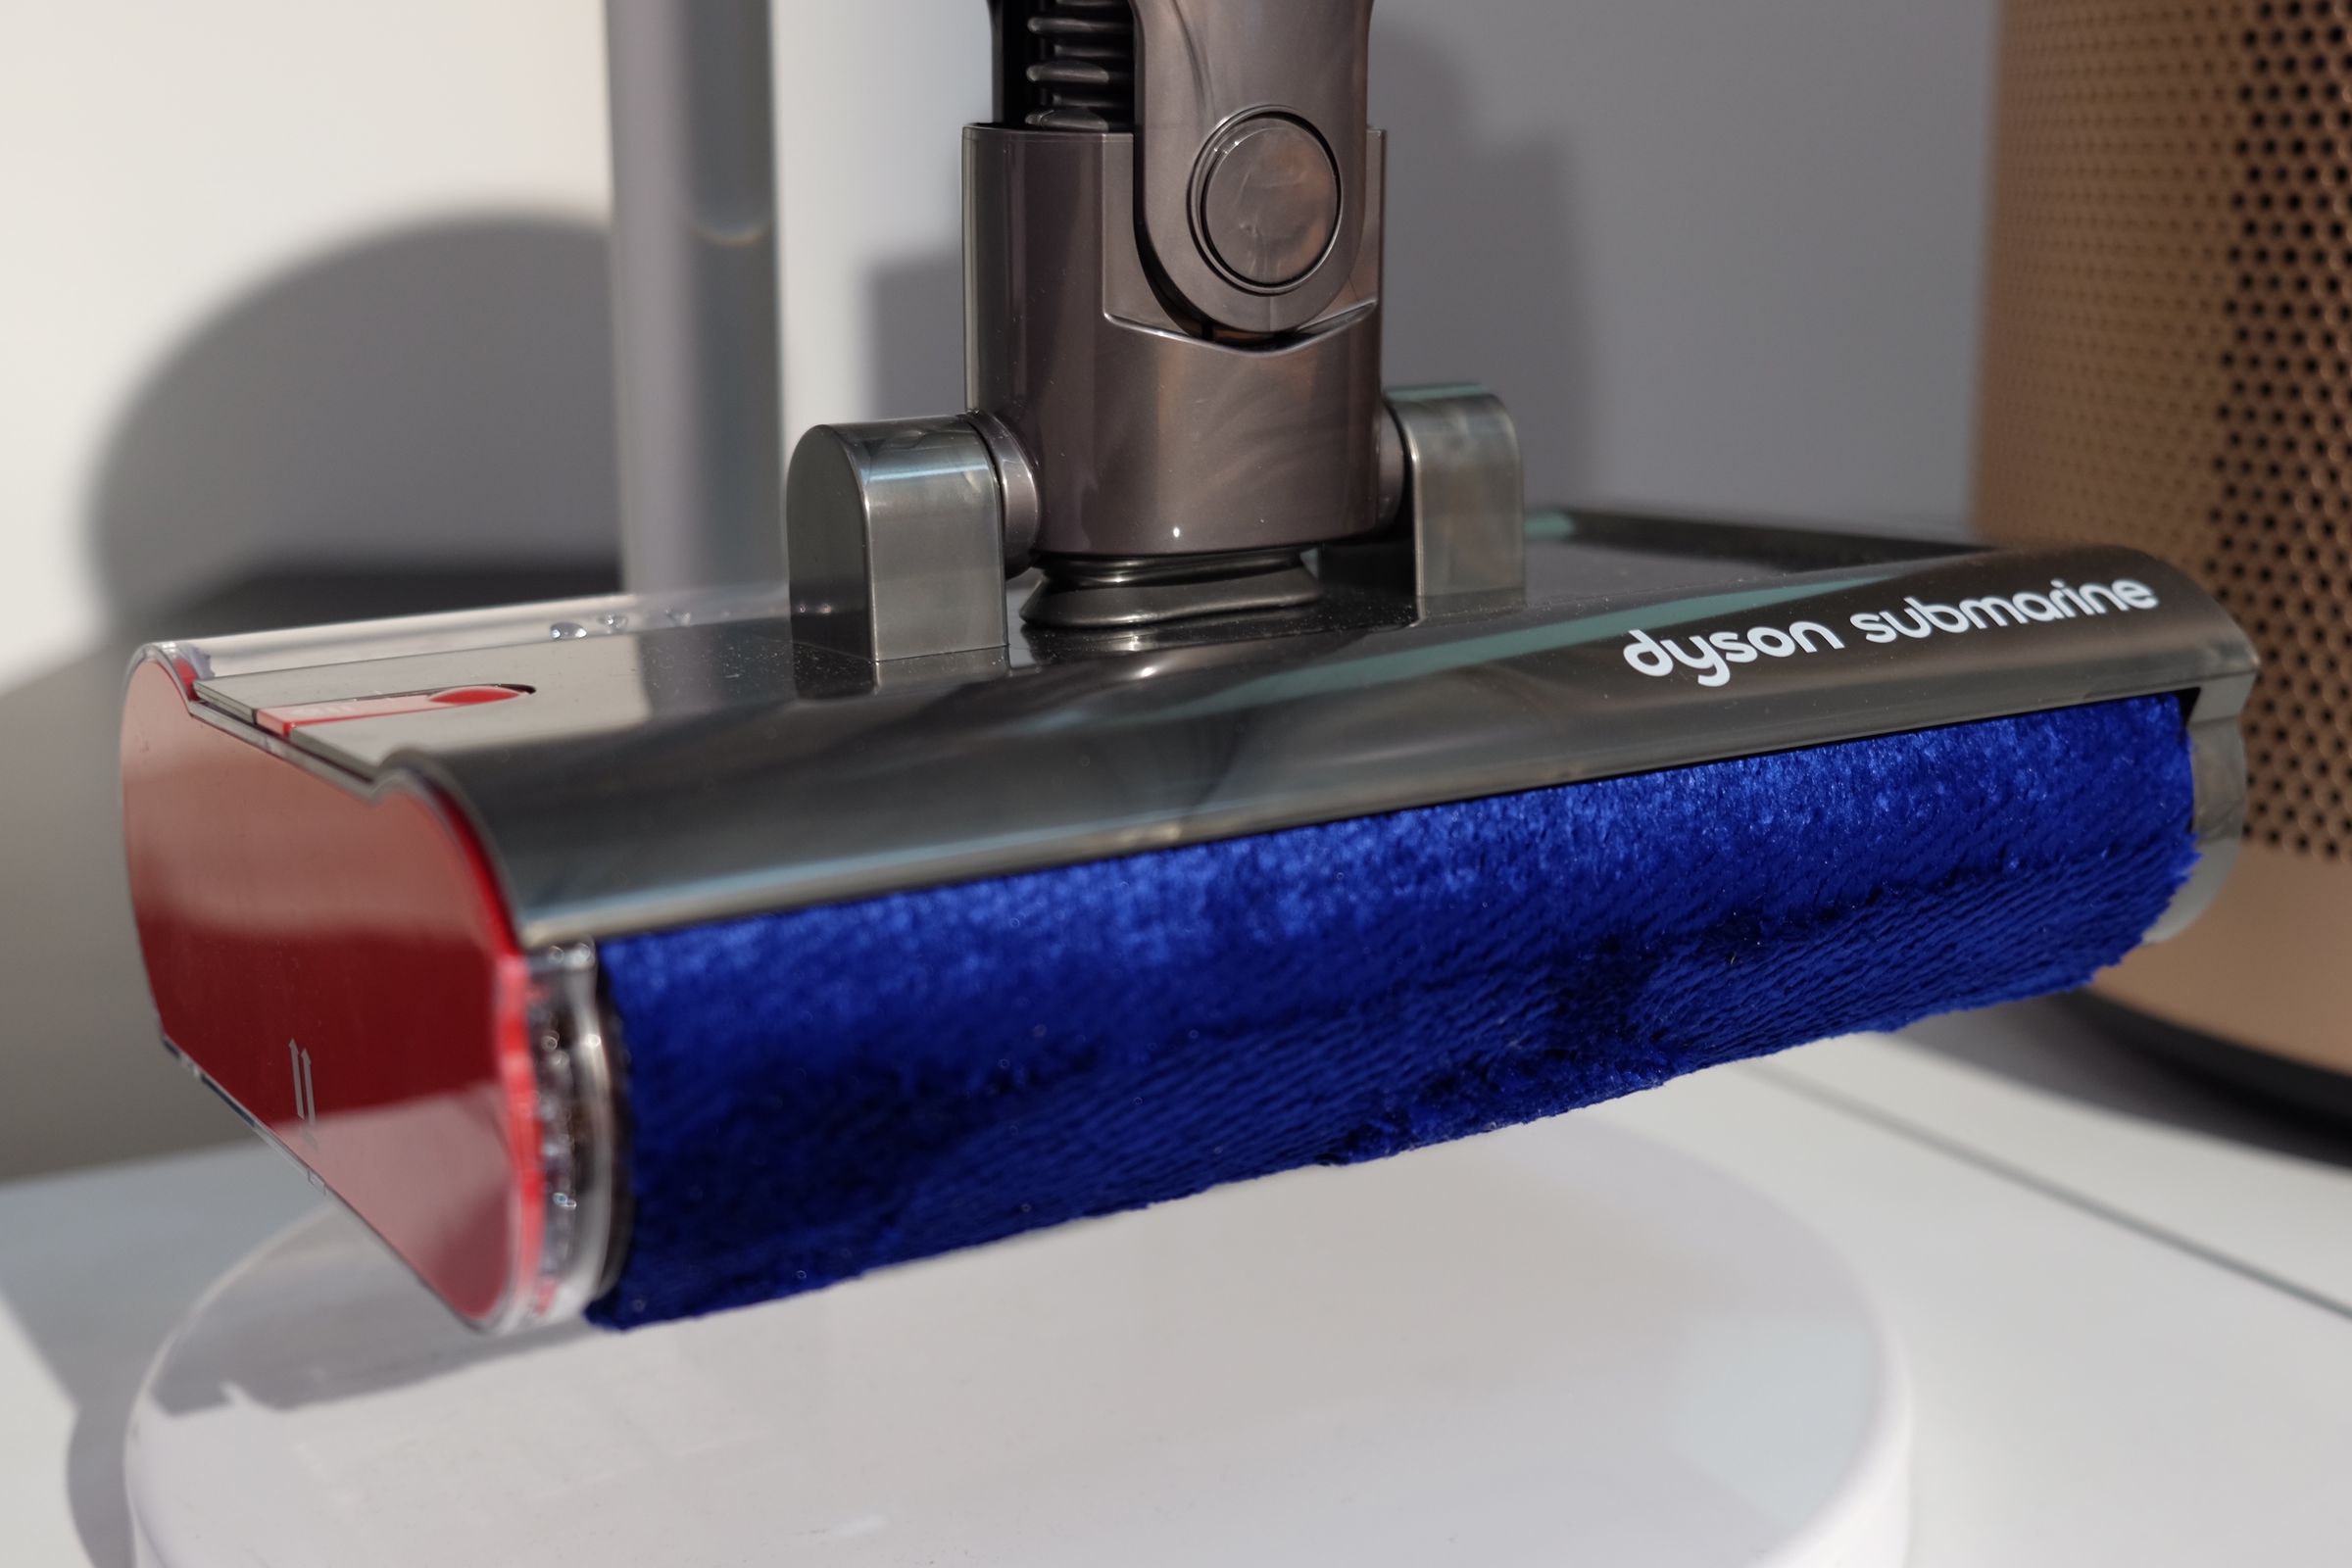 A close-up of the mopping attachment. It is rectangular, with a padded roller in front and a water tank in back.